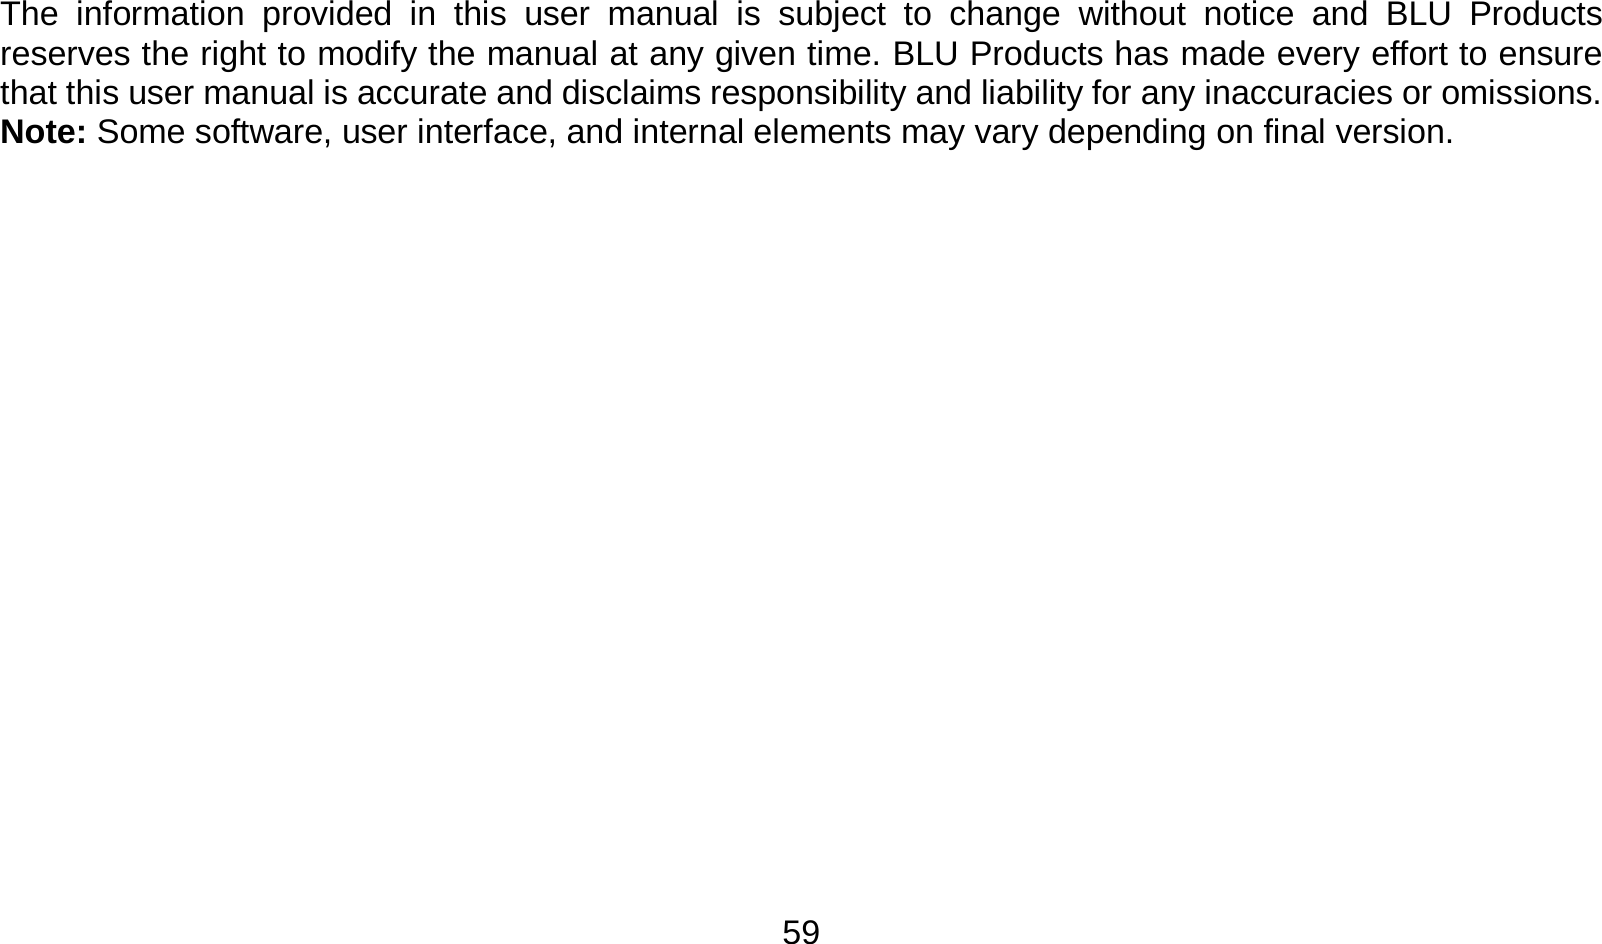   59 The information provided in this user manual is subject to change without notice and BLU Products reserves the right to modify the manual at any given time. BLU Products has made every effort to ensure that this user manual is accurate and disclaims responsibility and liability for any inaccuracies or omissions. Note: Some software, user interface, and internal elements may vary depending on final version.                  